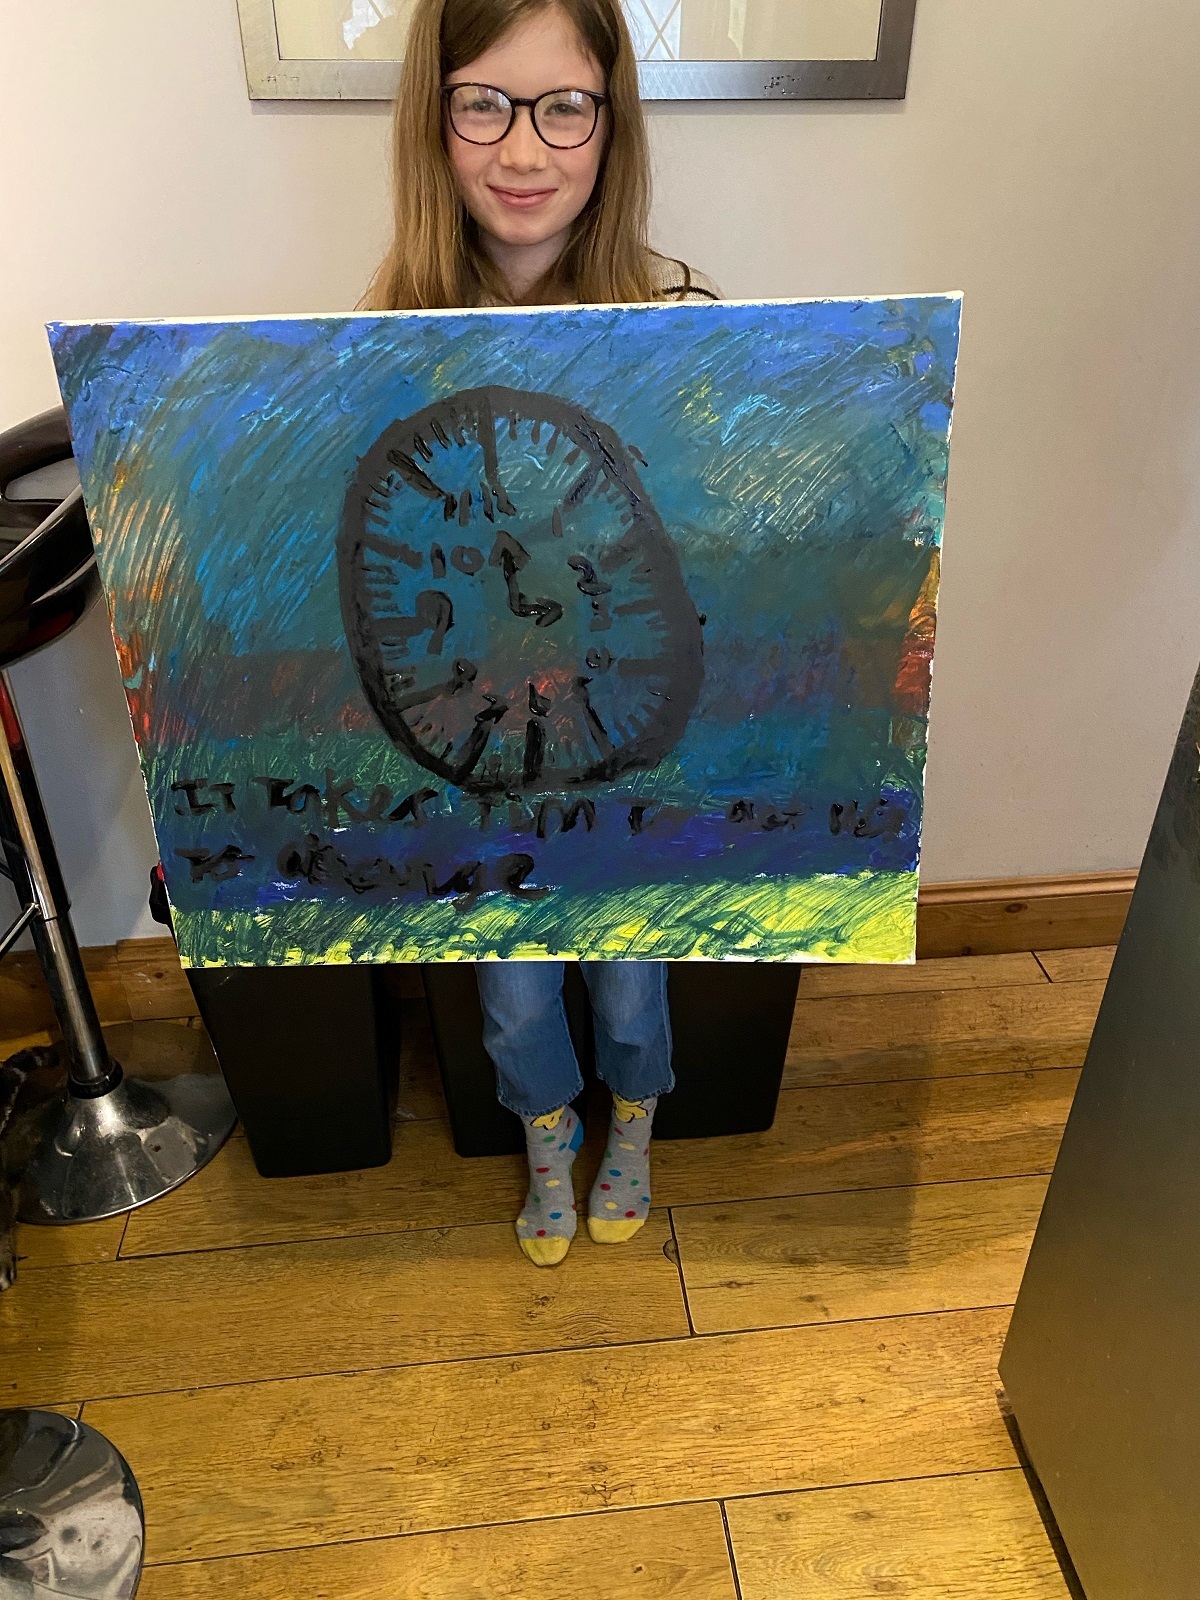 Hands of time - Imogen Tyers, ten, used her imagination to paint this picture